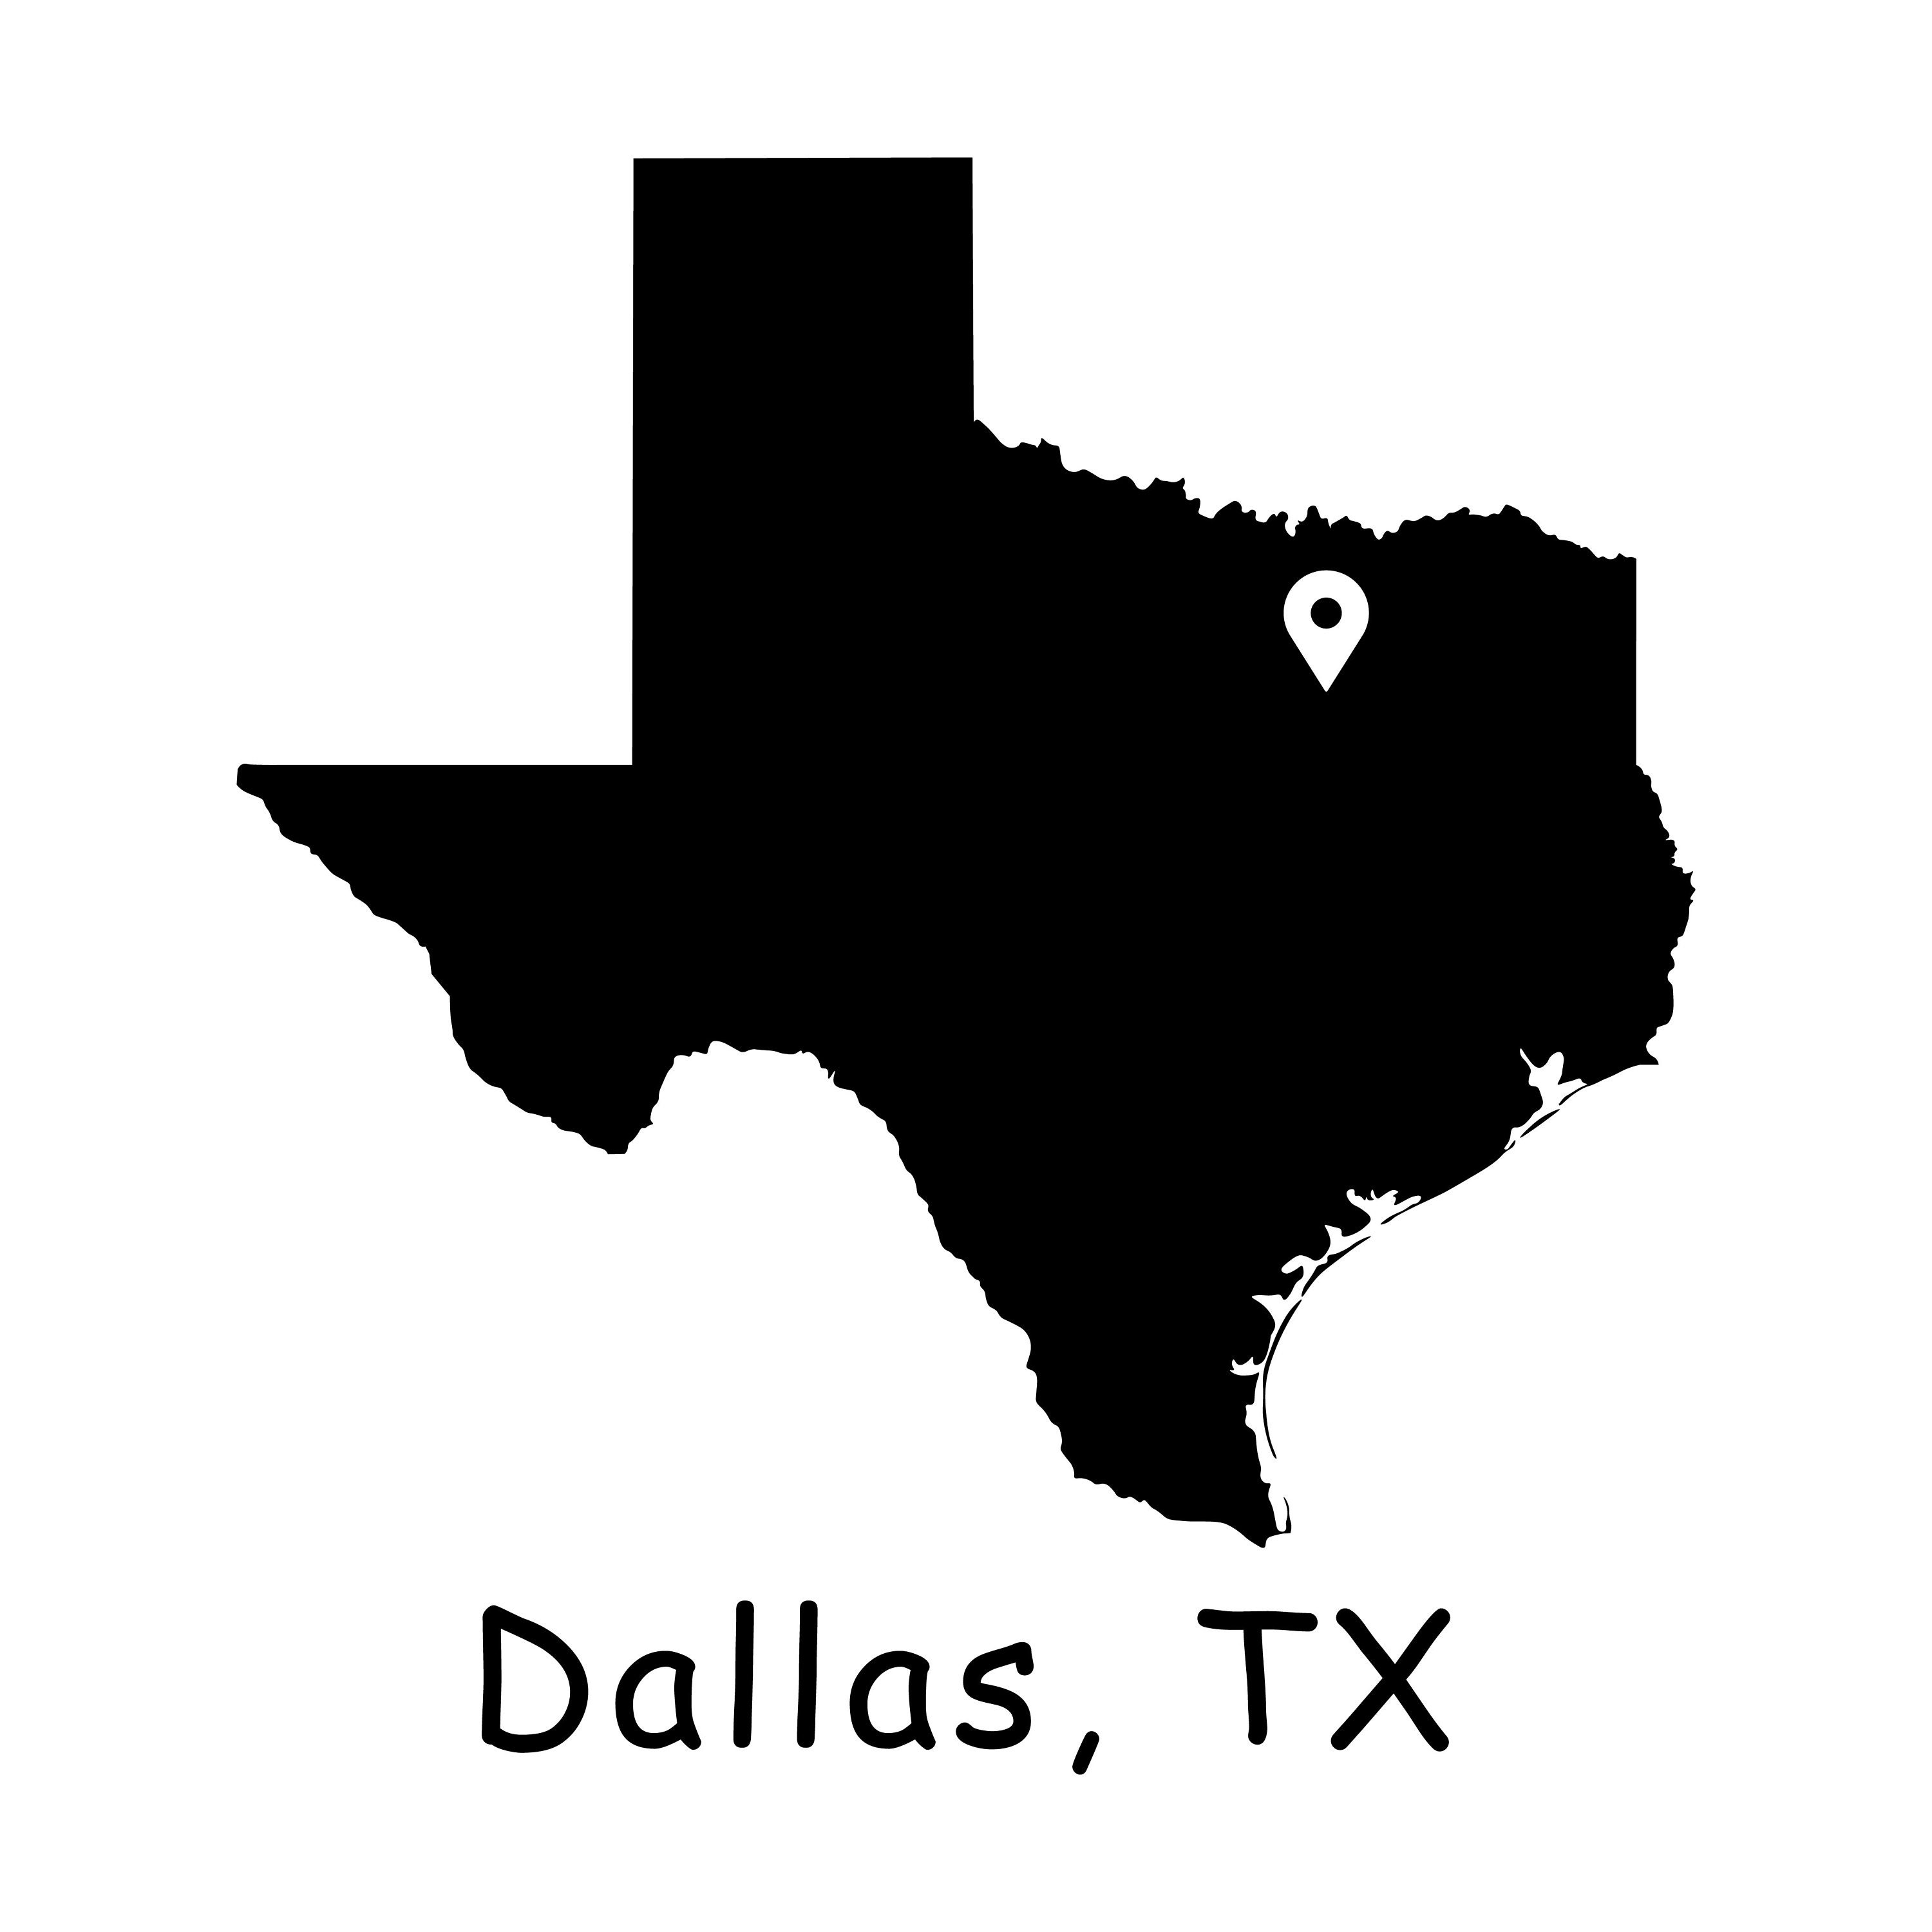 Dallas on Texas State Map, Dallas TX Texas USA US United States Map, Dallas  Texas Location Pin Drop Map Instant Digital Download Svg Png Eps 